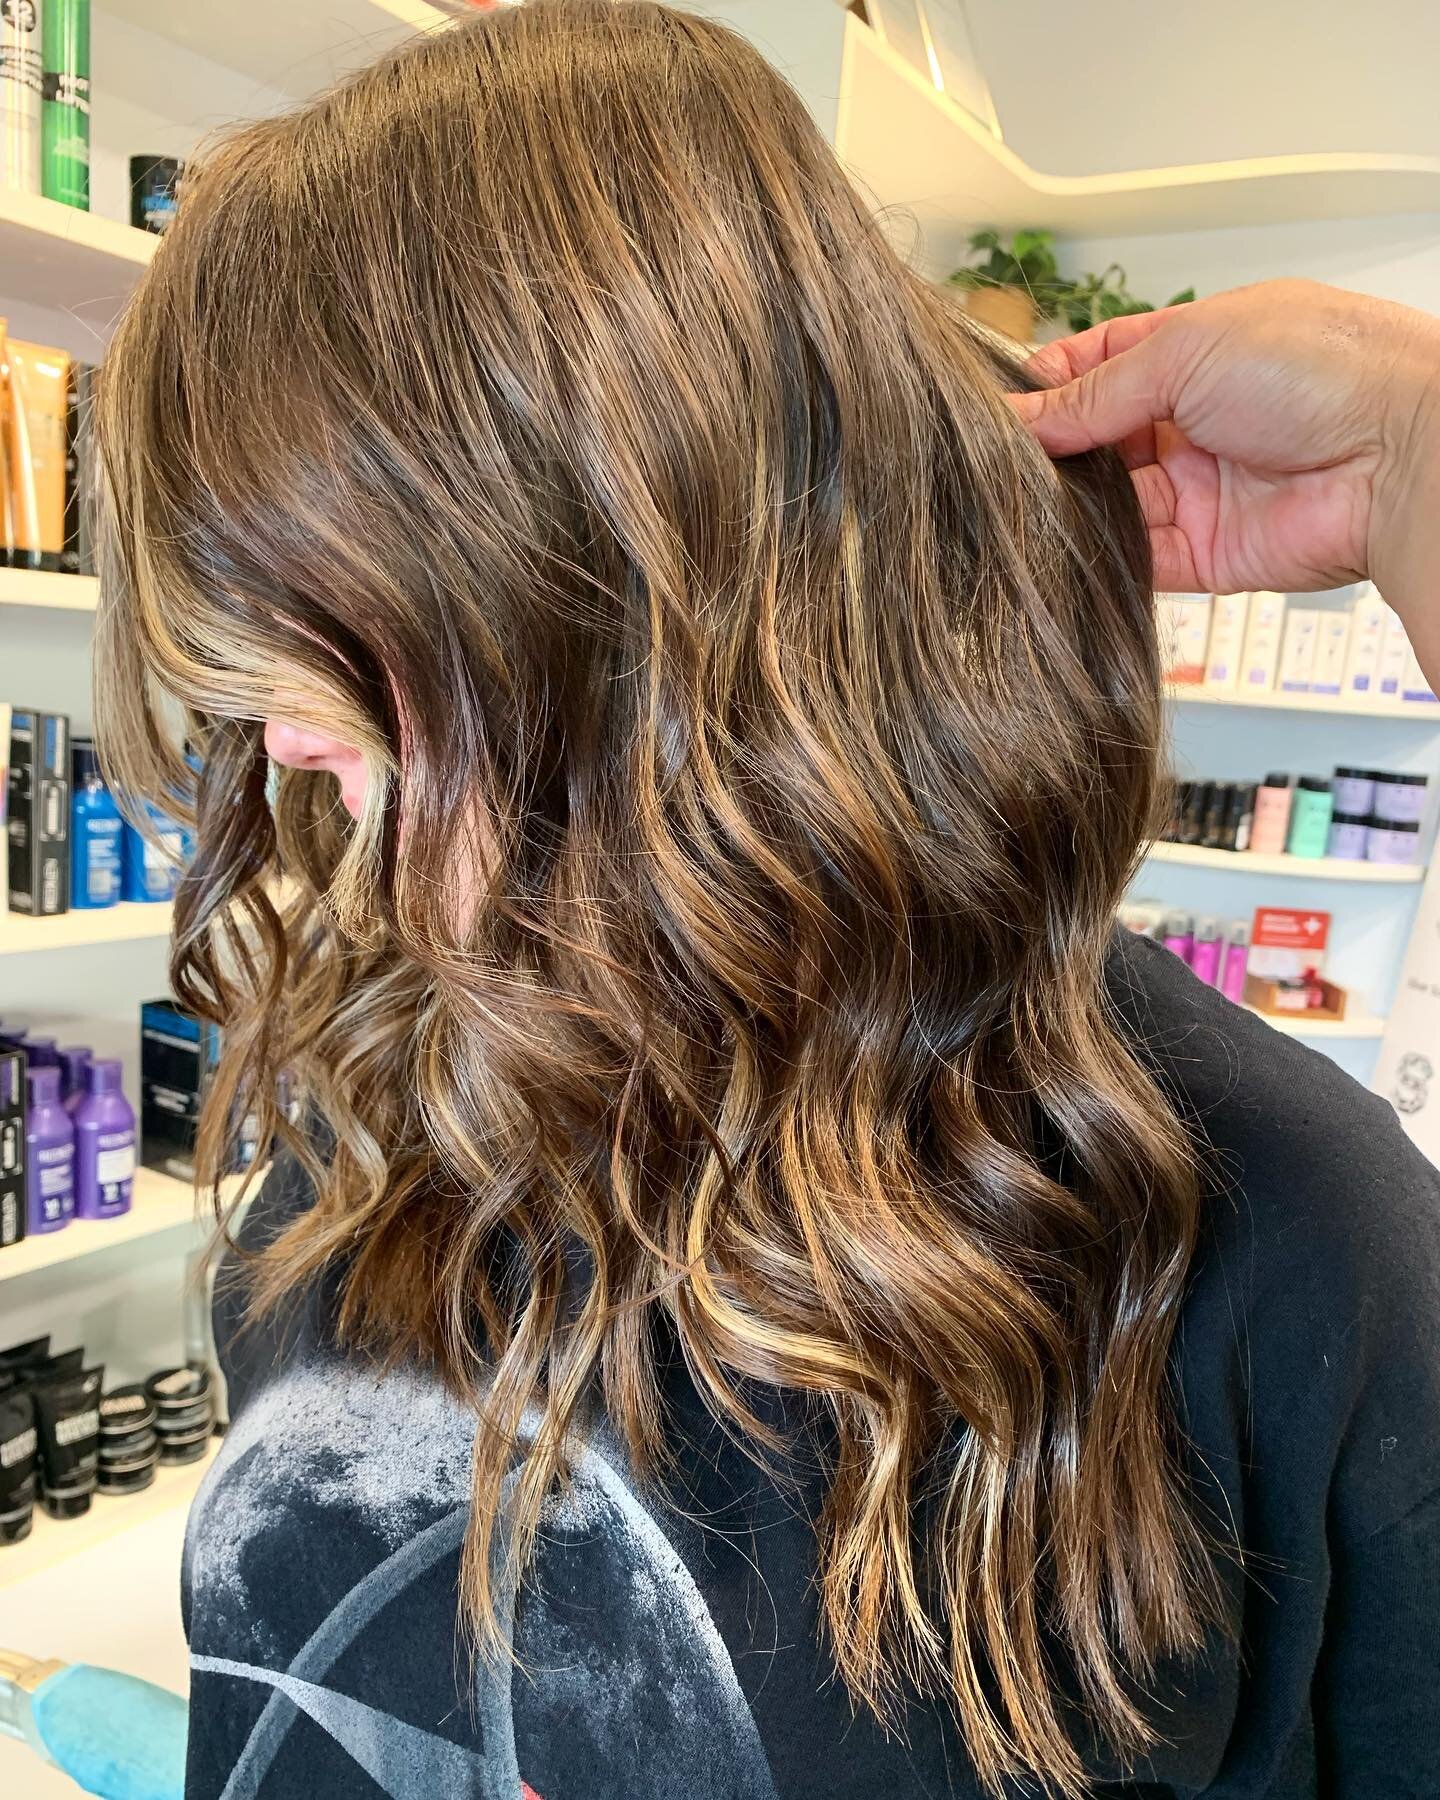 Less is more 🌟
Audrey created this look with only 10 foils giving this client just the right amount of brightness!

#ghd #ghdcurls #schwarzkopf #babylights #salon #morrinsville